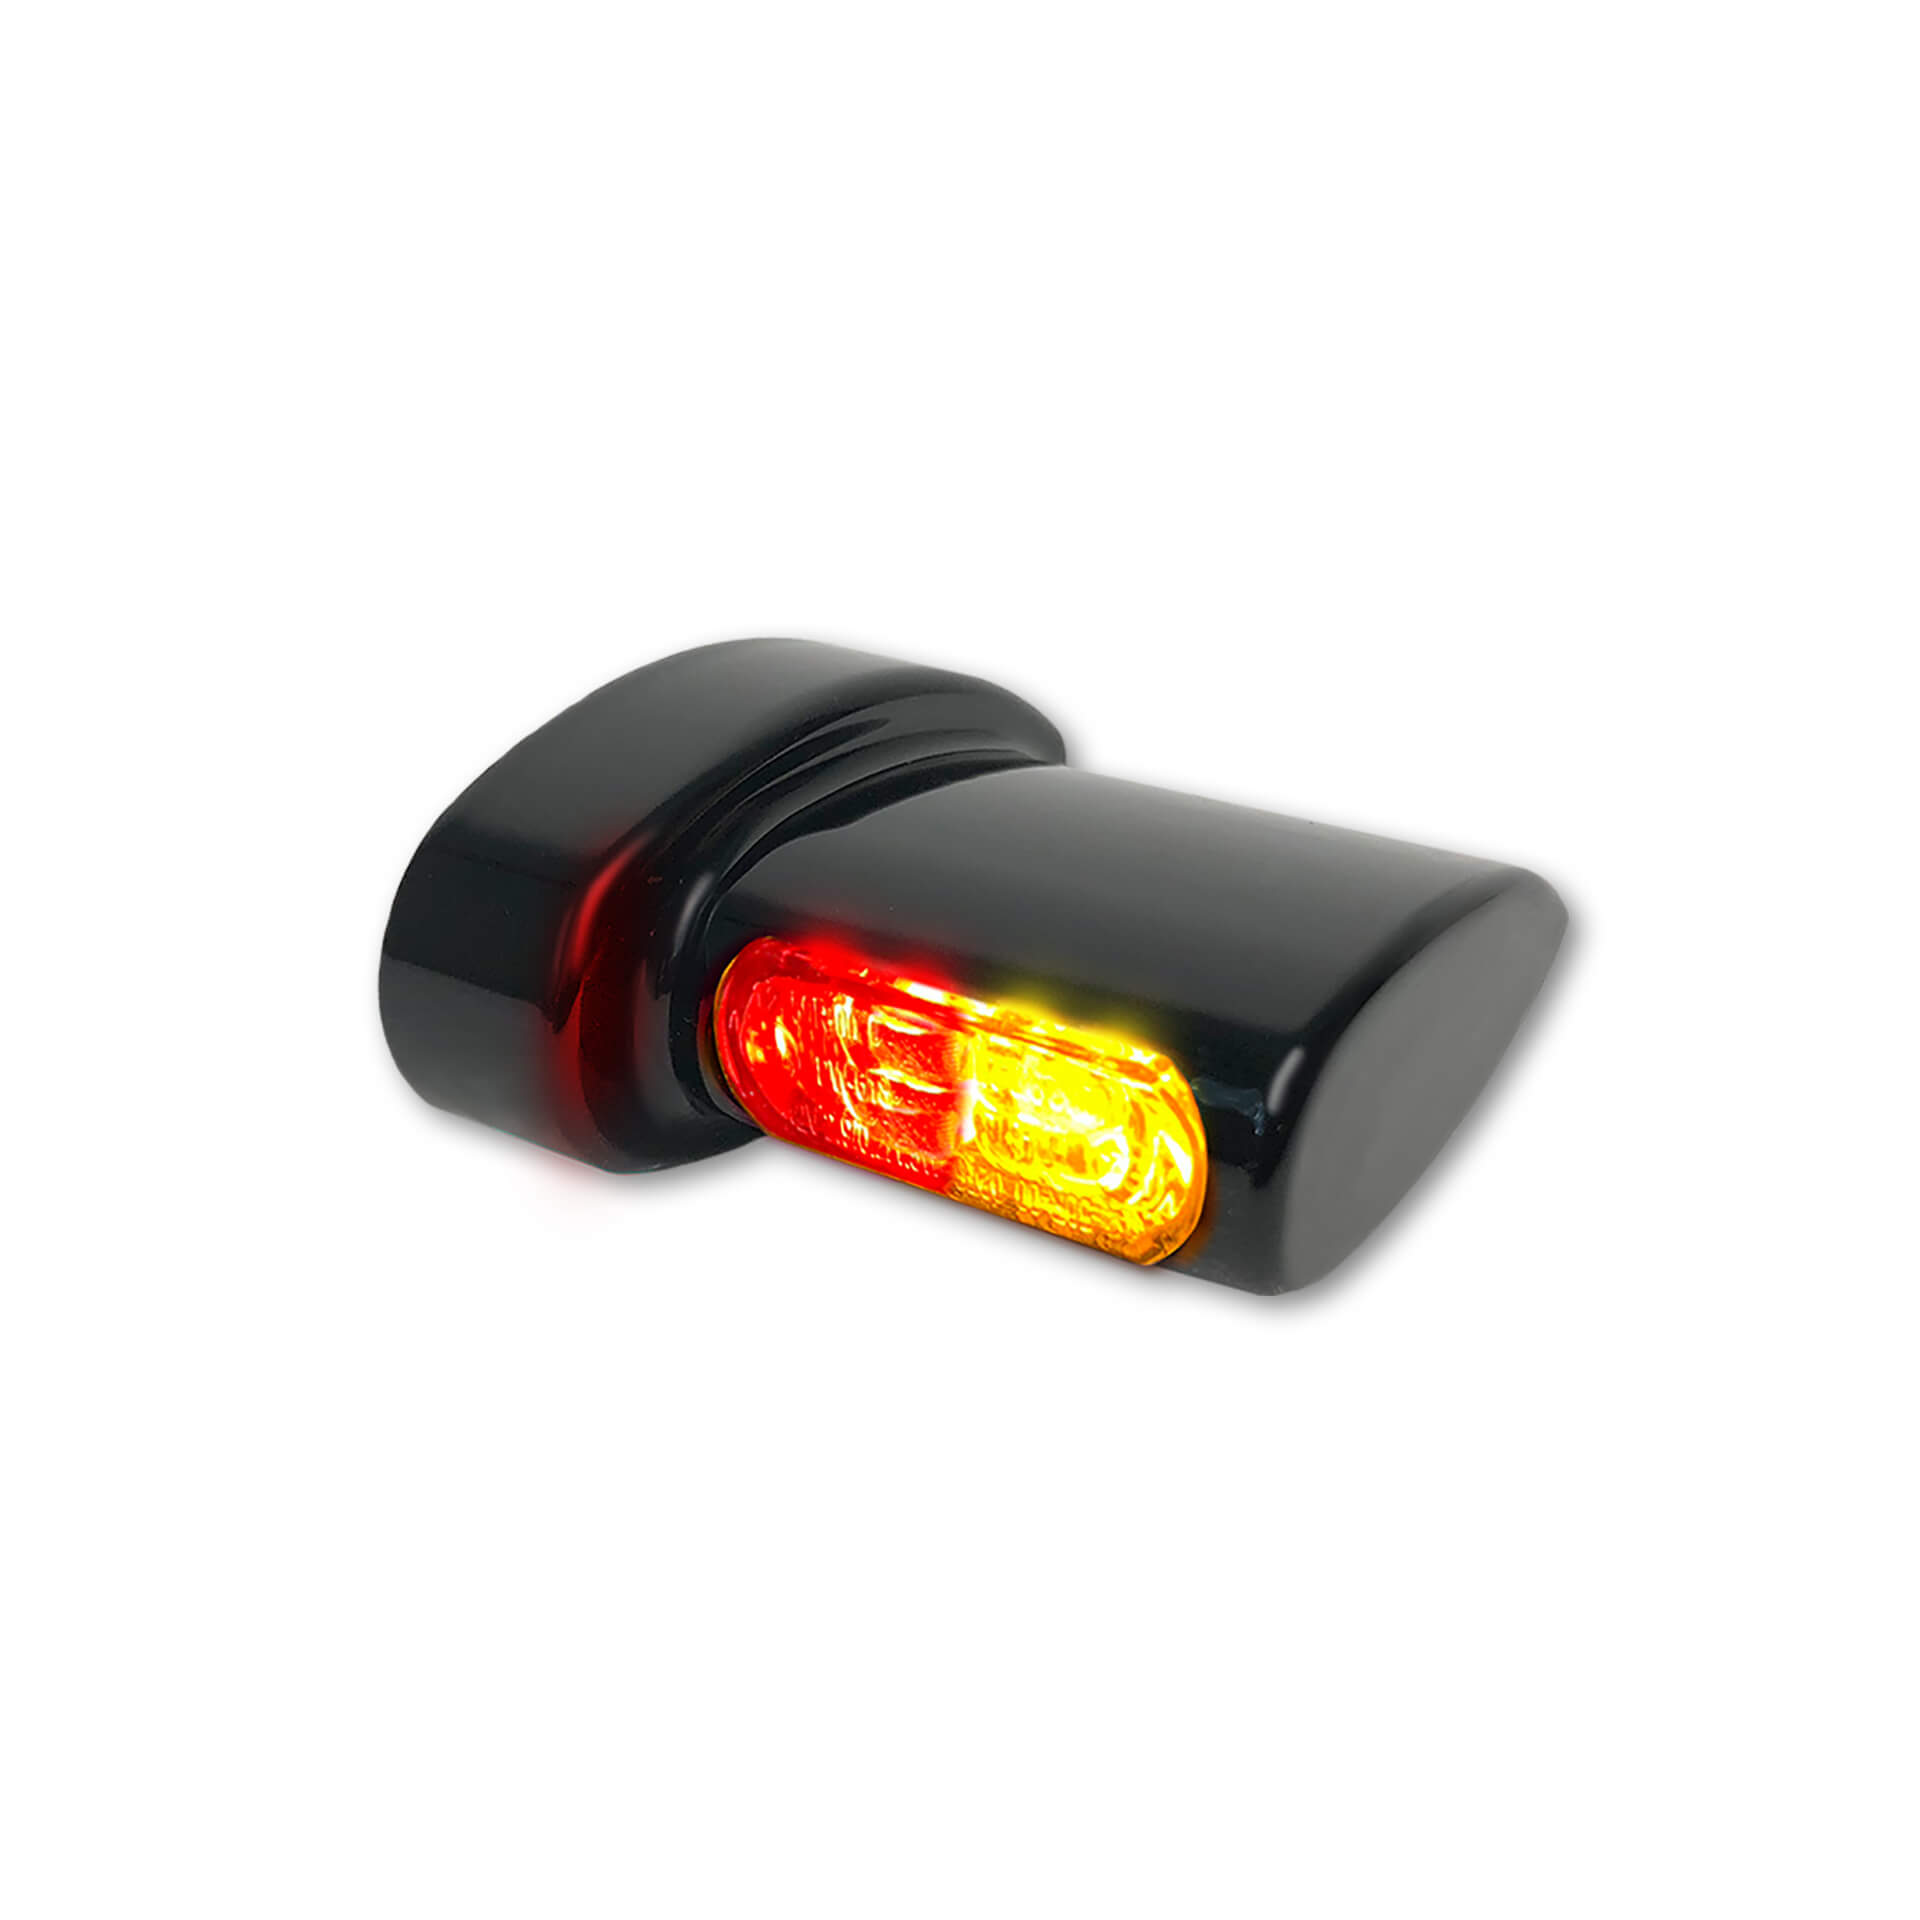 heinzbikes Winglets MICRO 3in1 LED indicators, all Harley-Davidson models 93-, in different colors